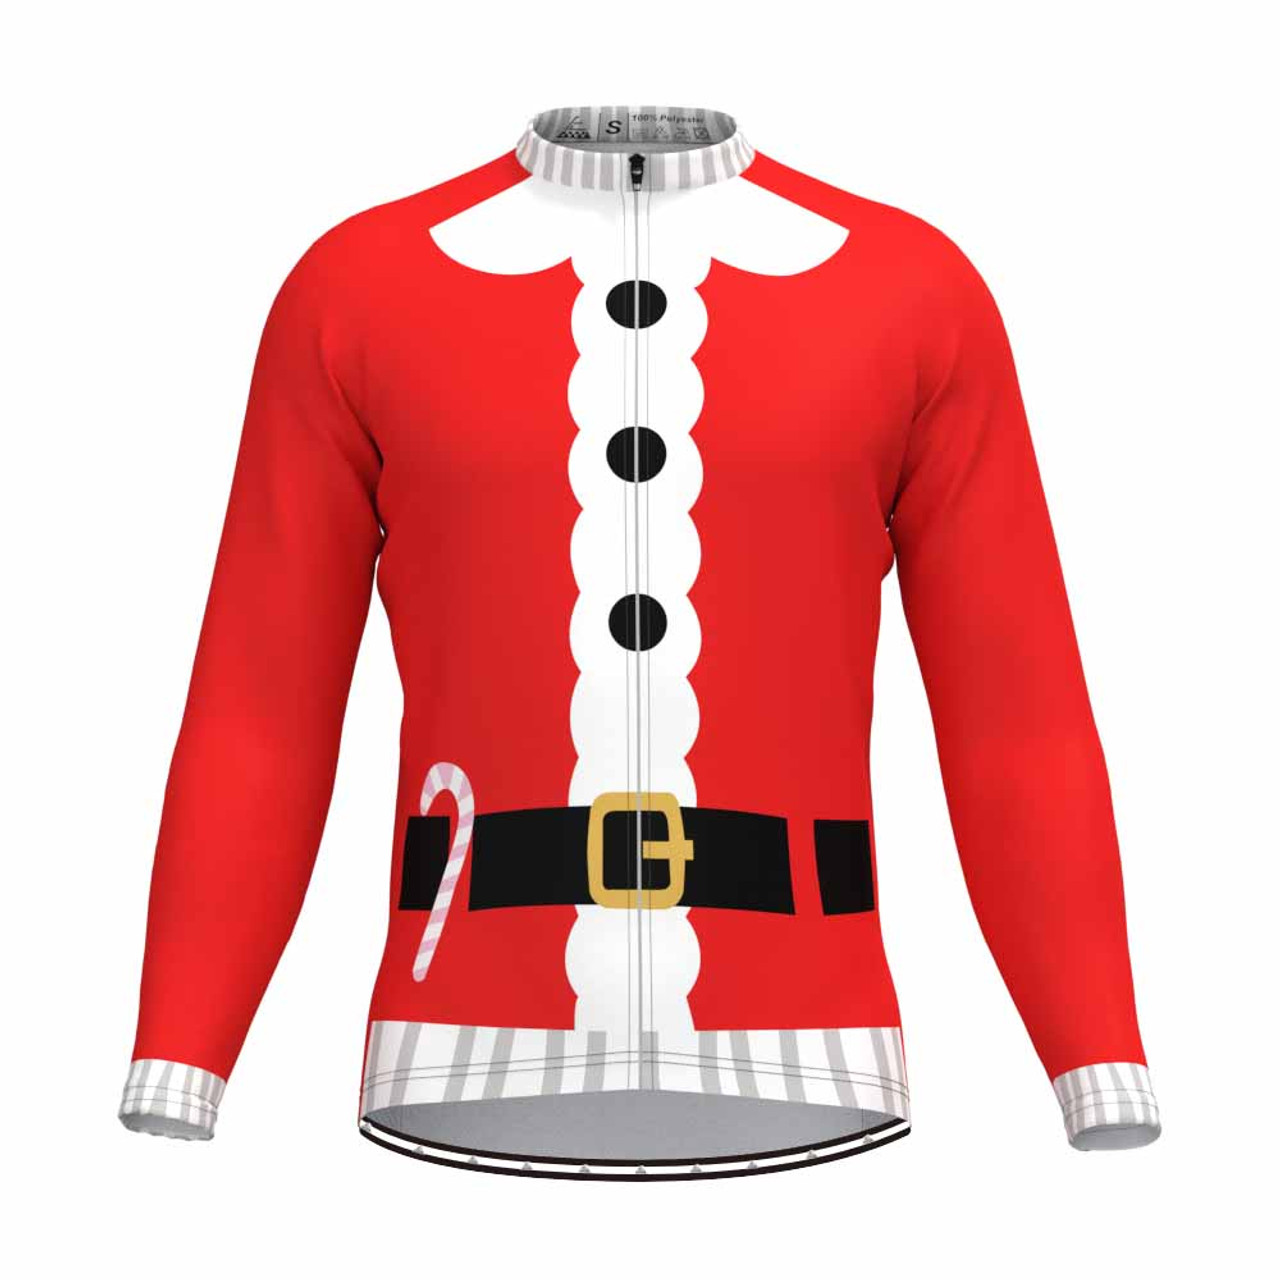 Santa Suit Ugly Christmas Sweater LS Cycling Jersey | Freestylecycling.com